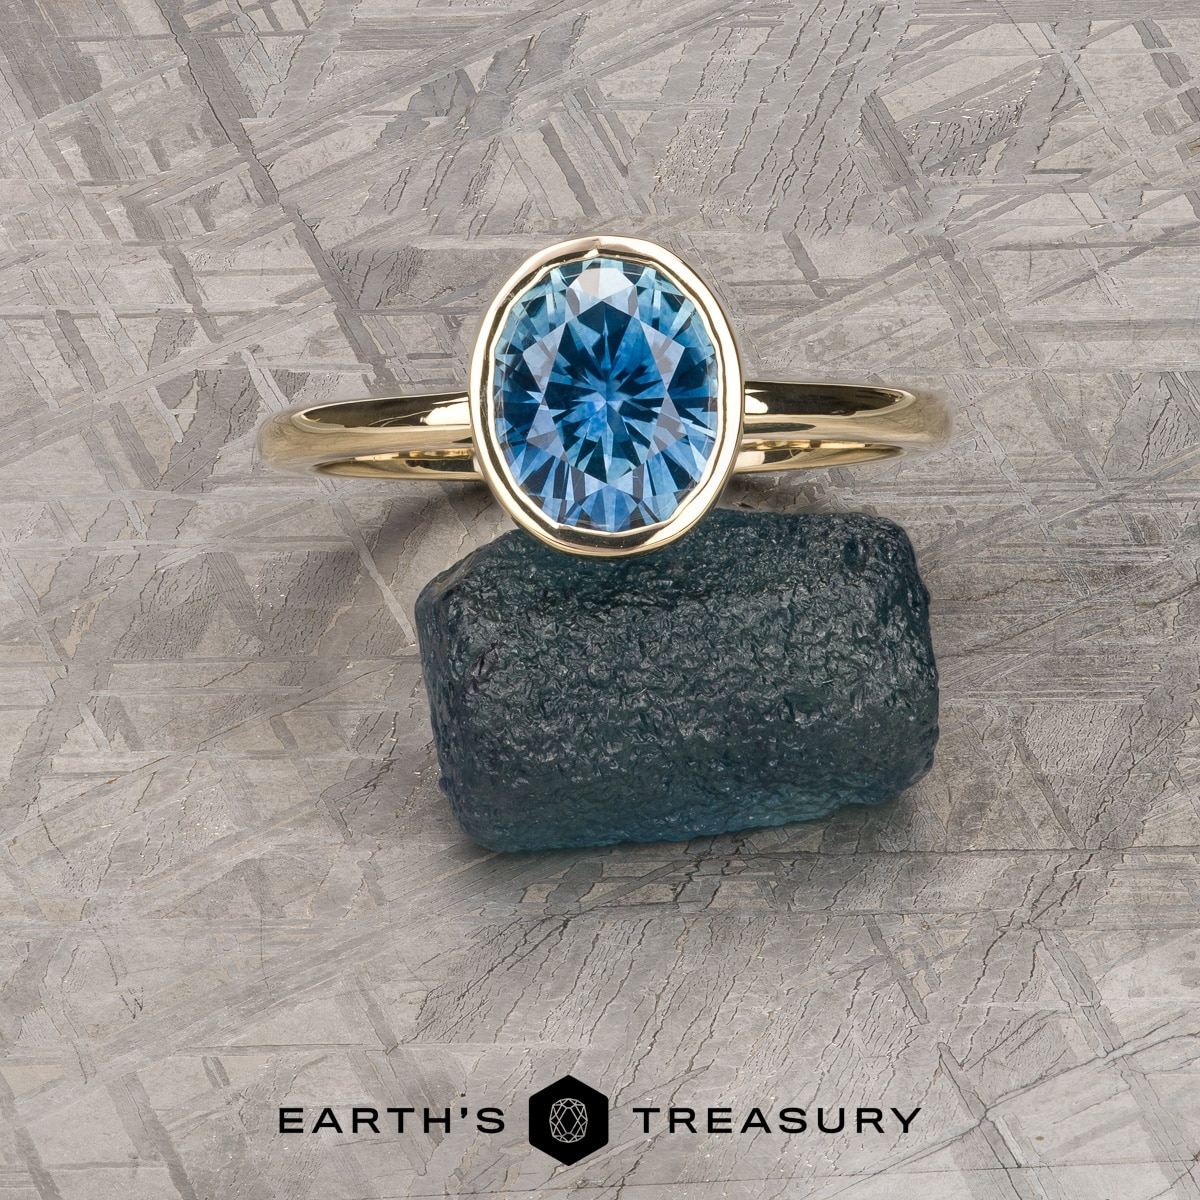 The "Deirdre" in 14k yellow gold with 2.01-carat Montana sapphire